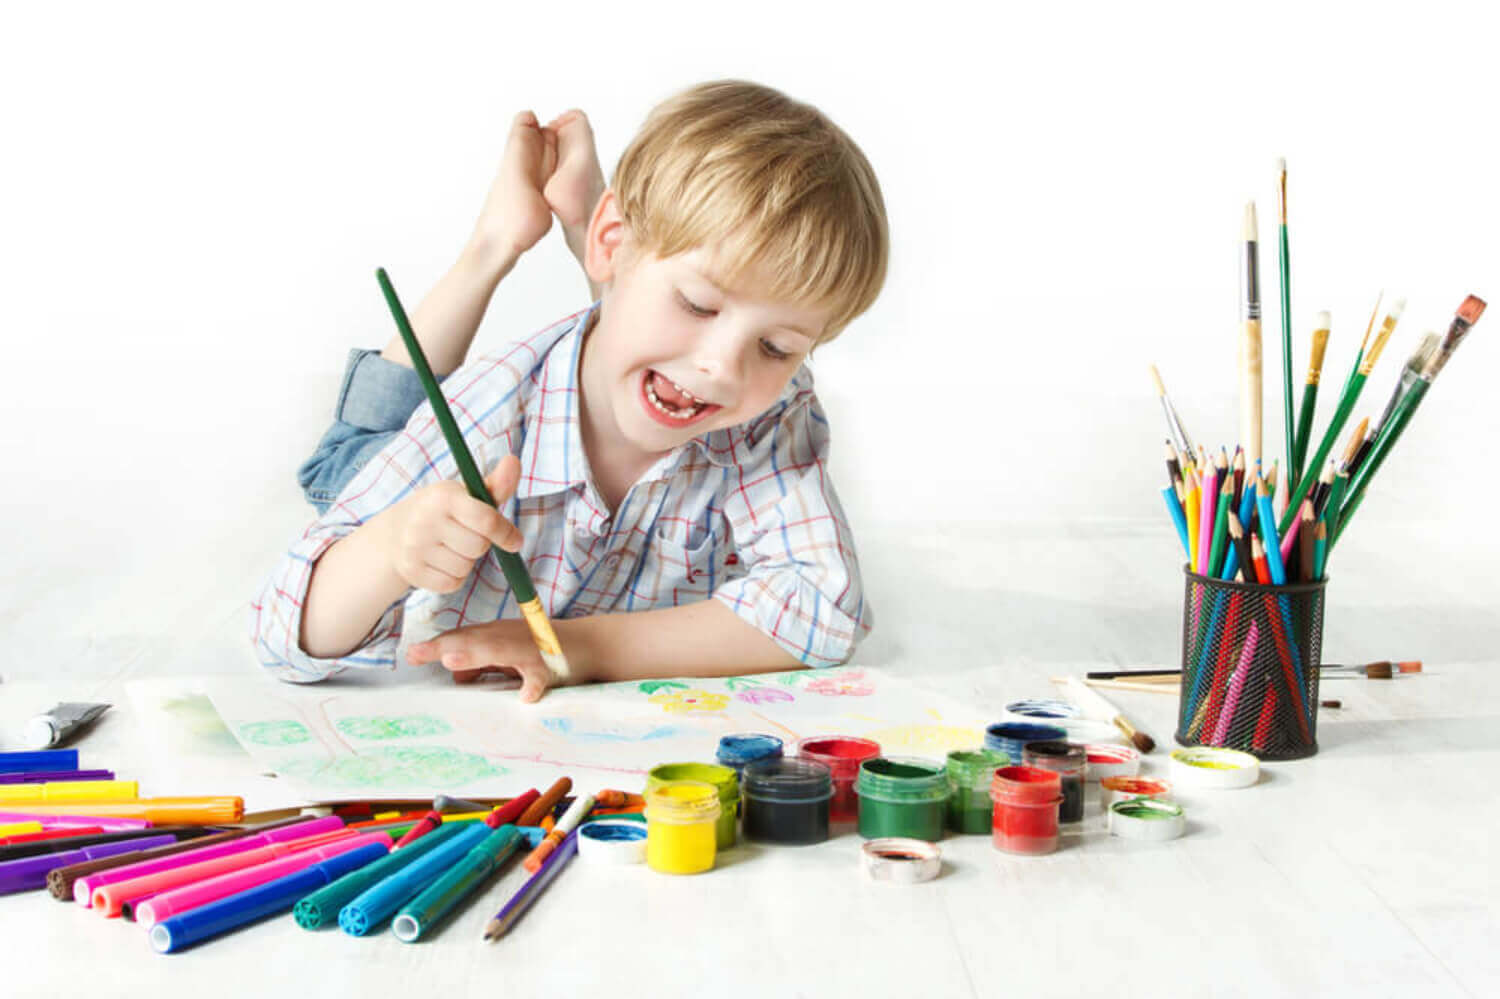 5 Tips to Promote Creativity in Children